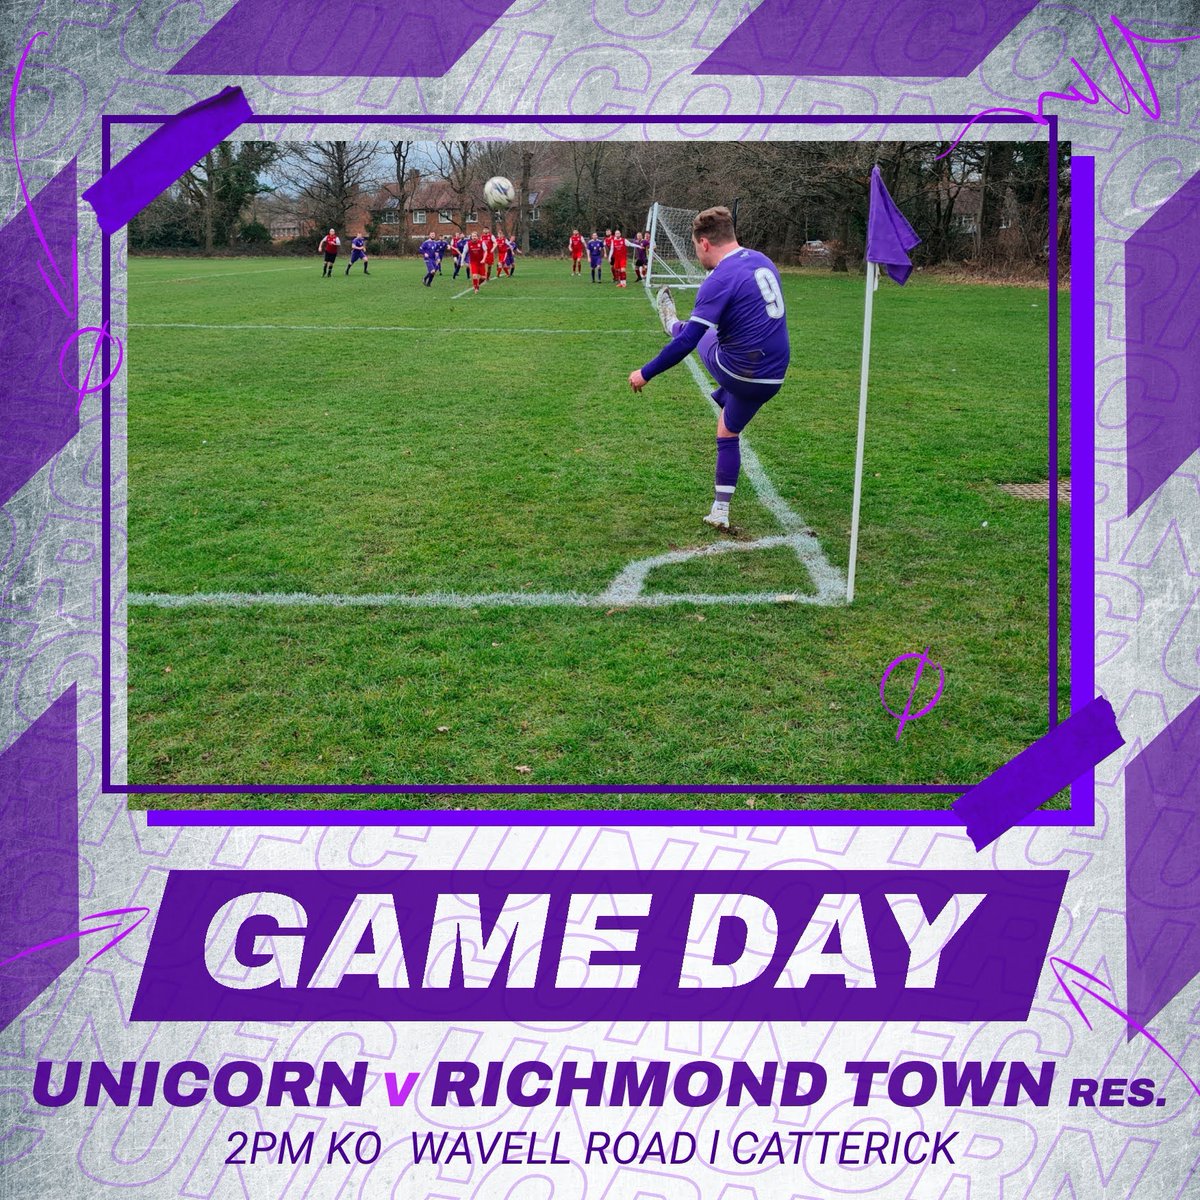 GAME DAY!
🆚 Richmond Town Res.
🏆 Wensleydale League
📍 Wavell Road
⏰ 2pm KO
#earlyko #grassroots #unicorn #unicornfc 🦄🦄